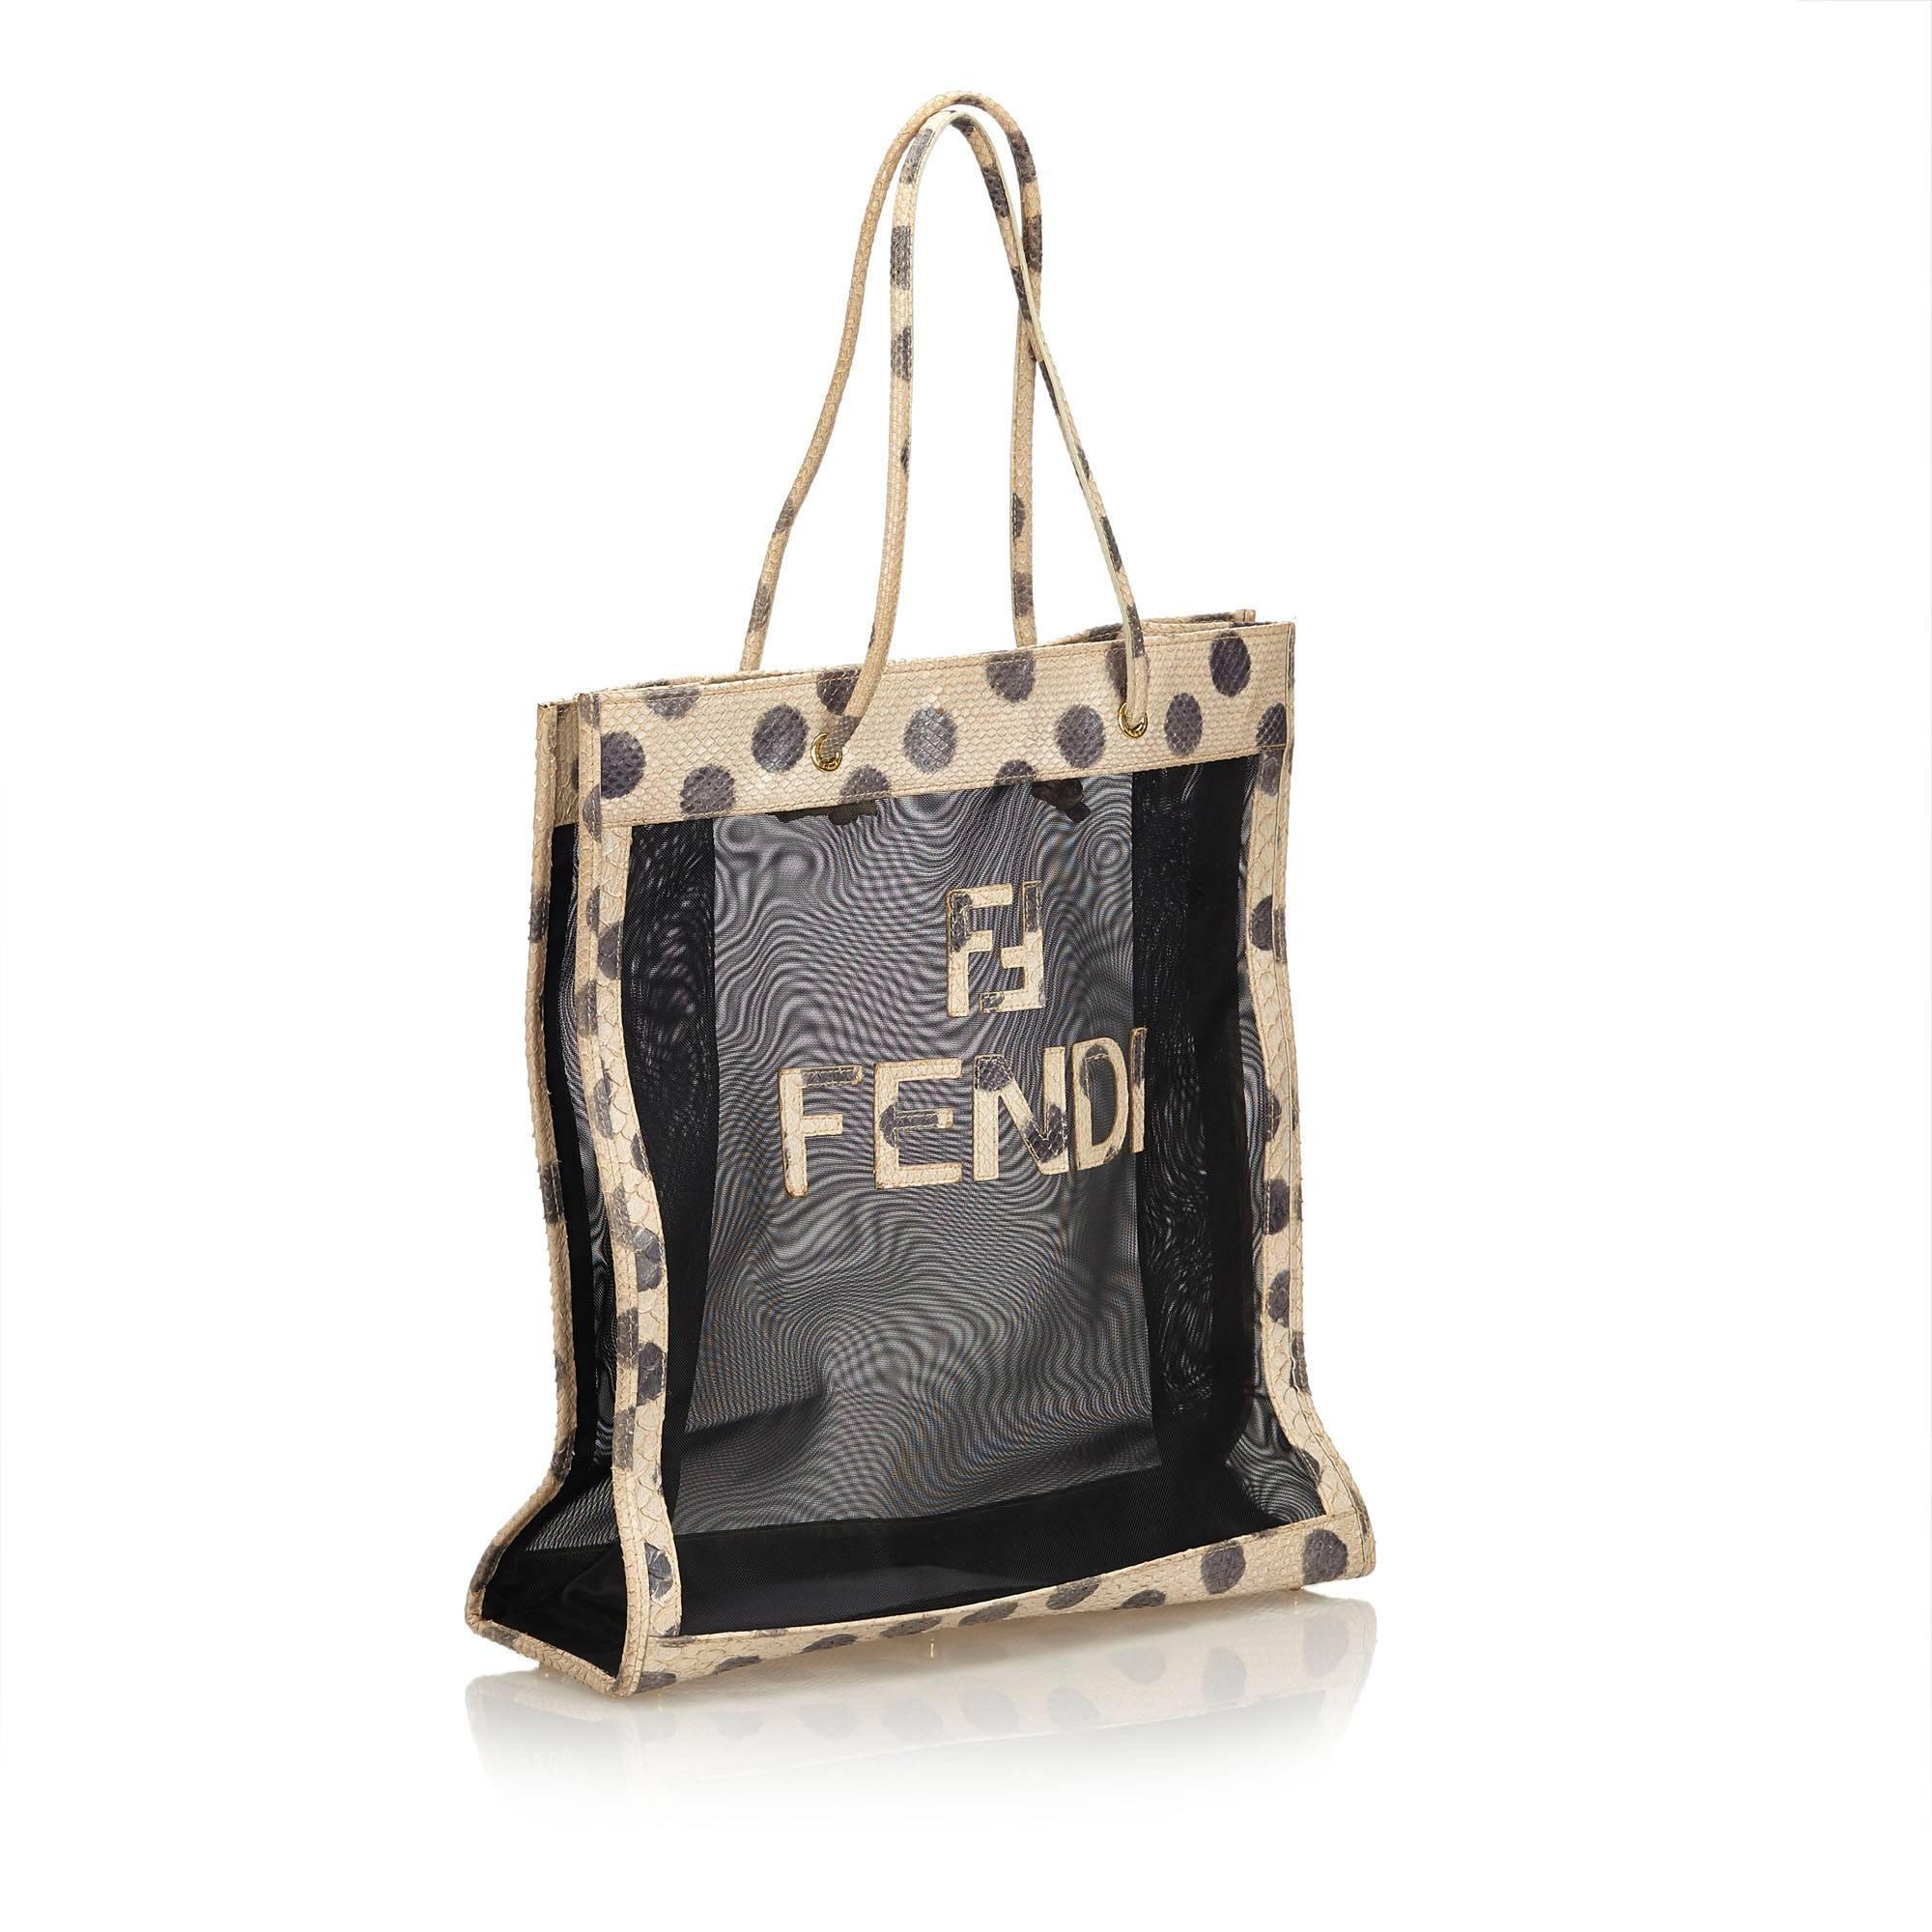 This tote bag features a mesh body with polka dot leather trim, leather strap, and an open top. 

It carries a B condition rating.

Dimensions: 
Length 36 cm
Width 38 cm
Depth 12 cm
Drop 22 cm

Inclusions: Dust Bag

Color: Black x White x